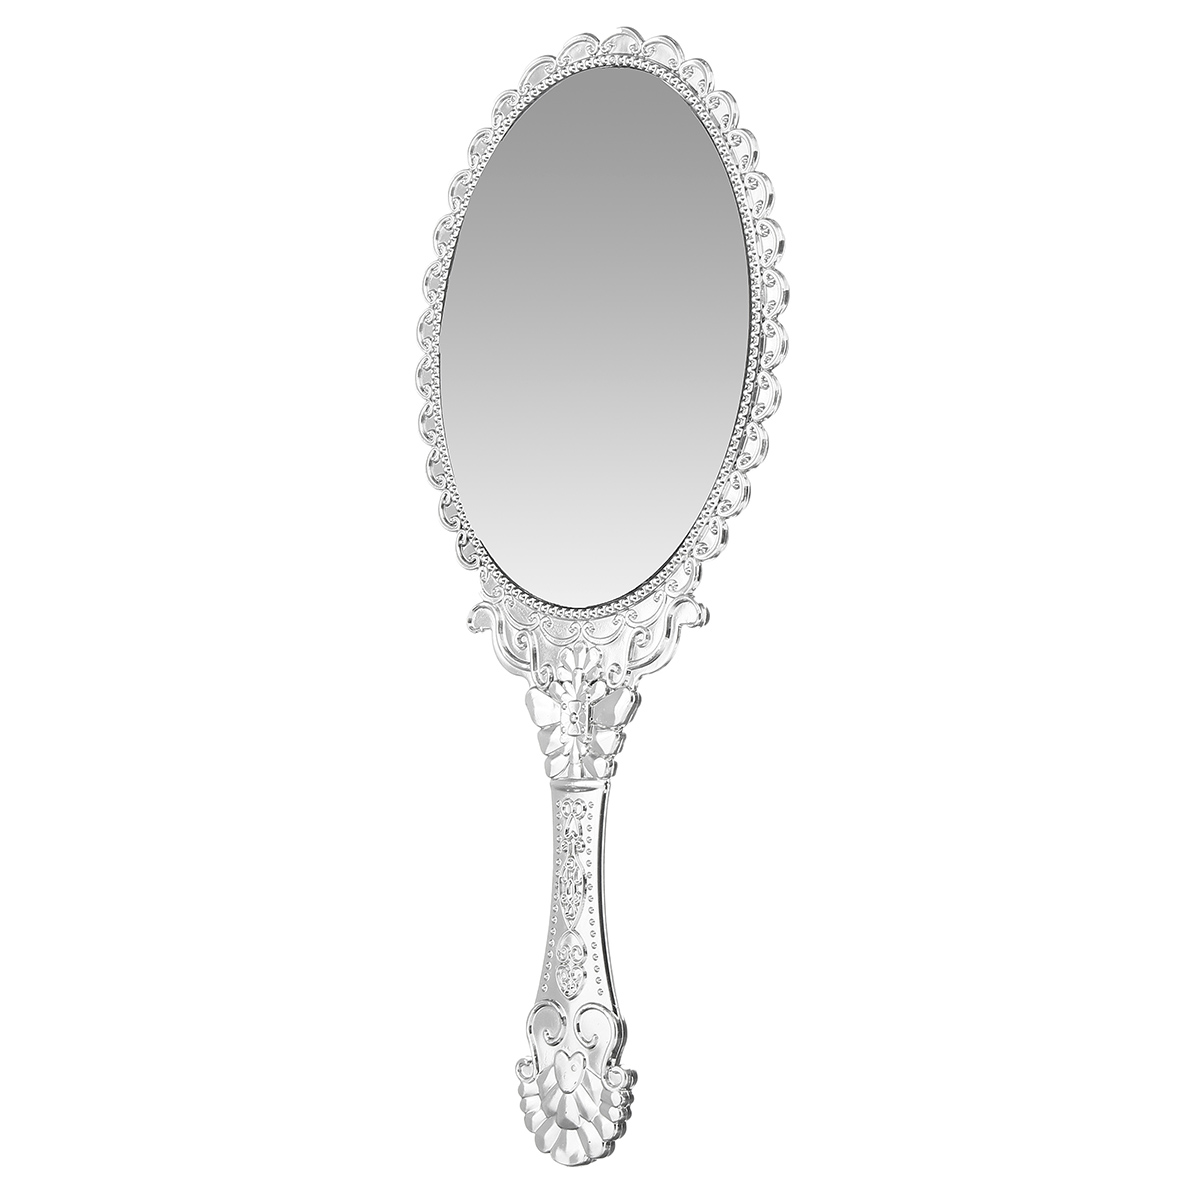 Vintage-Repousse-Oval-Makeup-Floral-Mirror-Hand-Held-Mirrors-Silver-Cosmetic-1096061